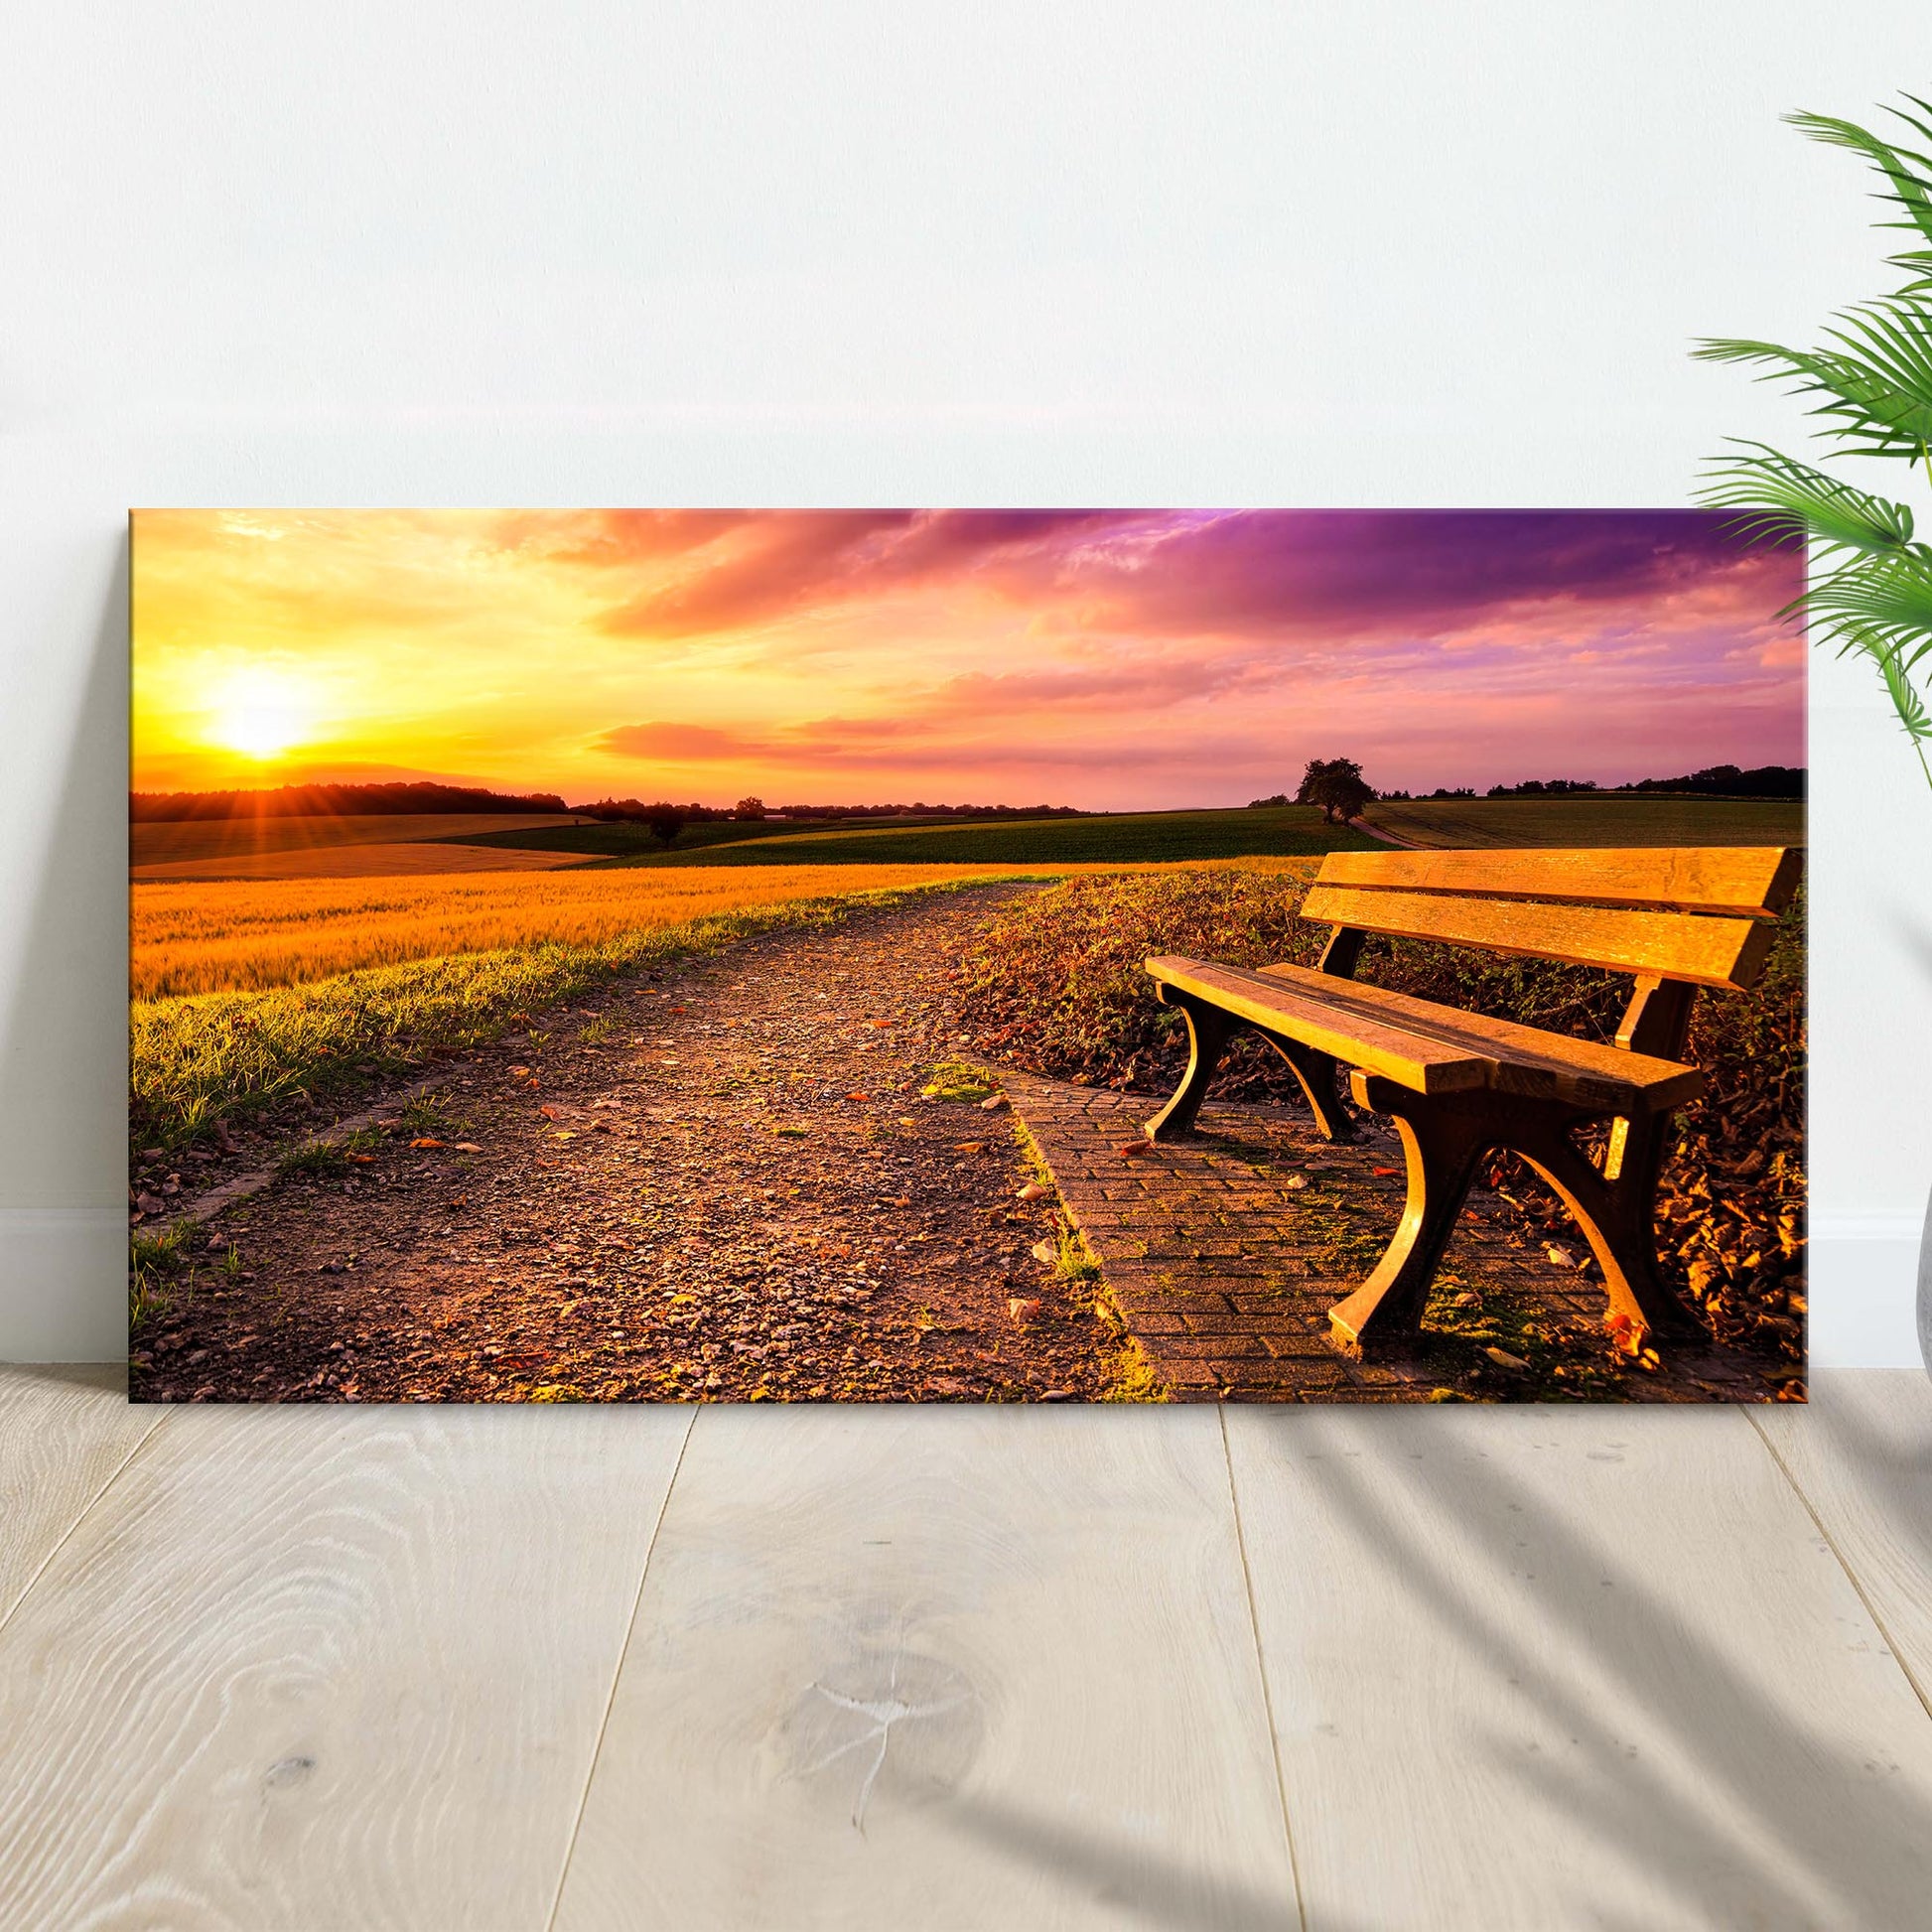 Idyllic Sunset Field Canvas Wall Art - Image by Tailored Canvases